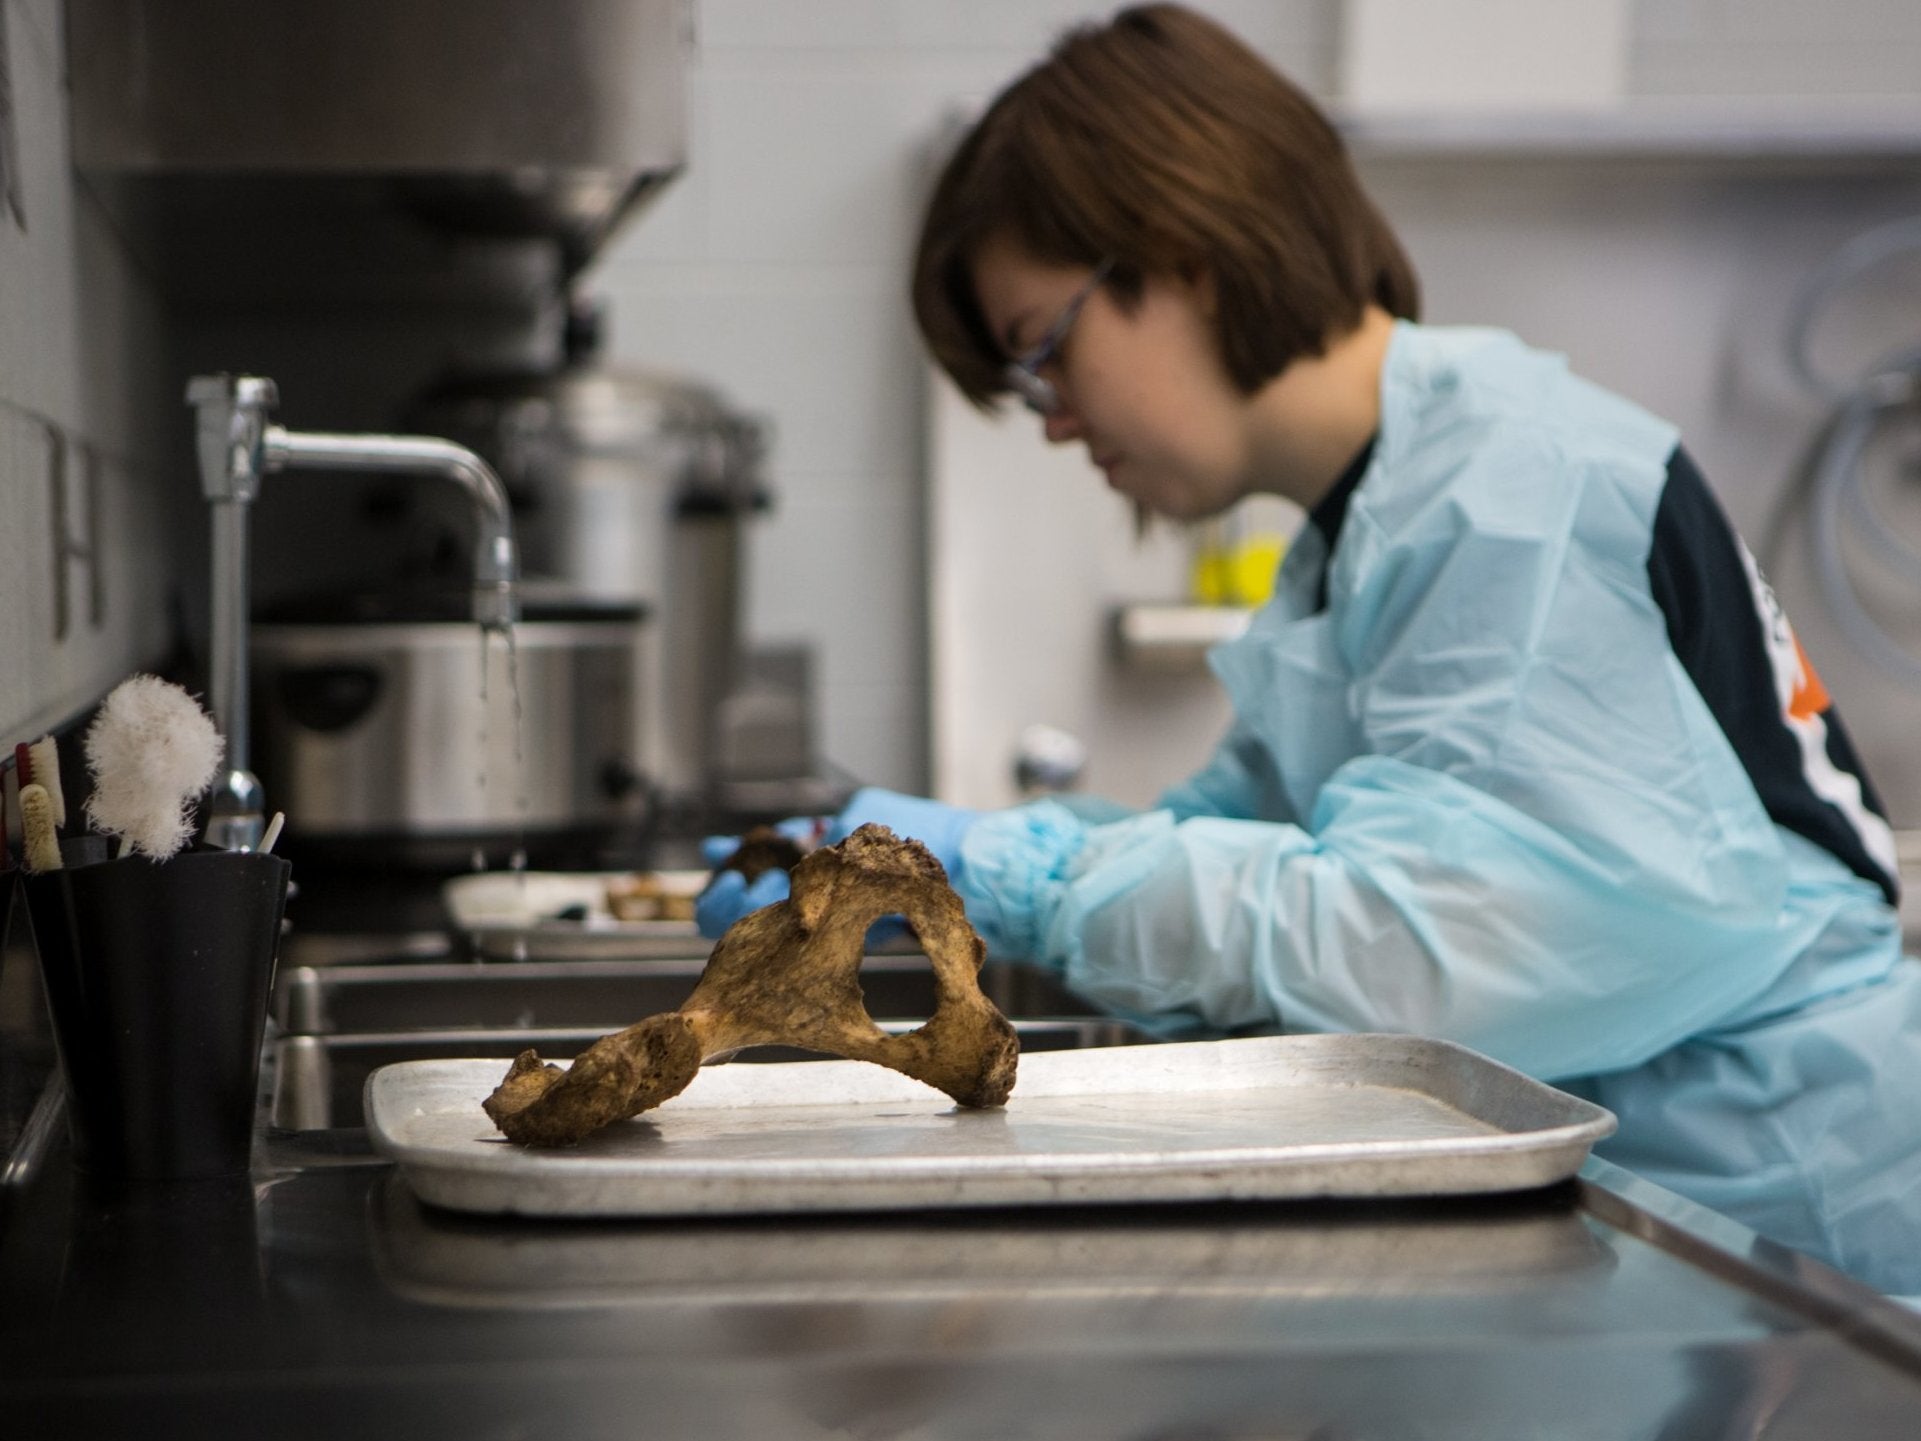 &#13;
Anthropology student cleans bones with a toothbrush at the Forensic Anthropology Center &#13;